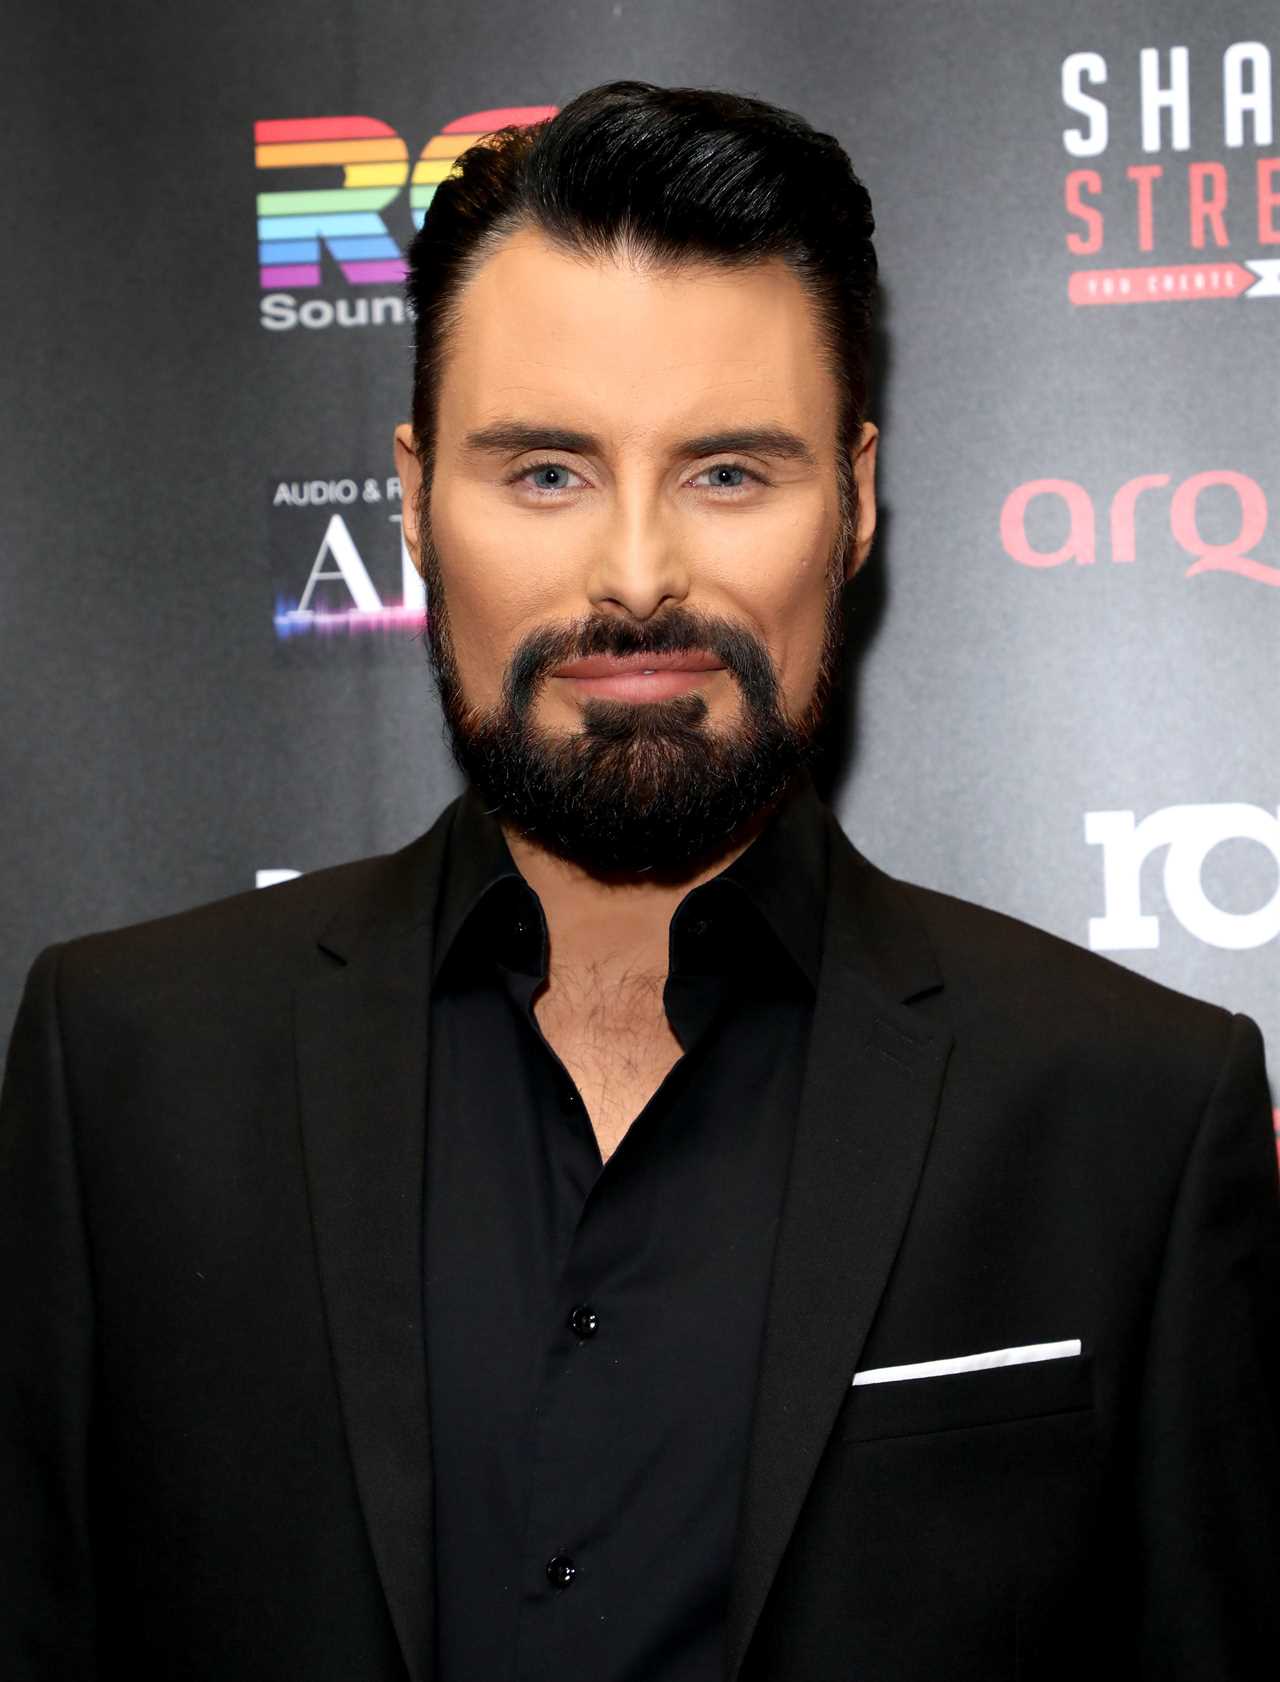 Rylan Clark shows off huge driveway in the snow with impressive Christmas decorations at £1.2m mansion